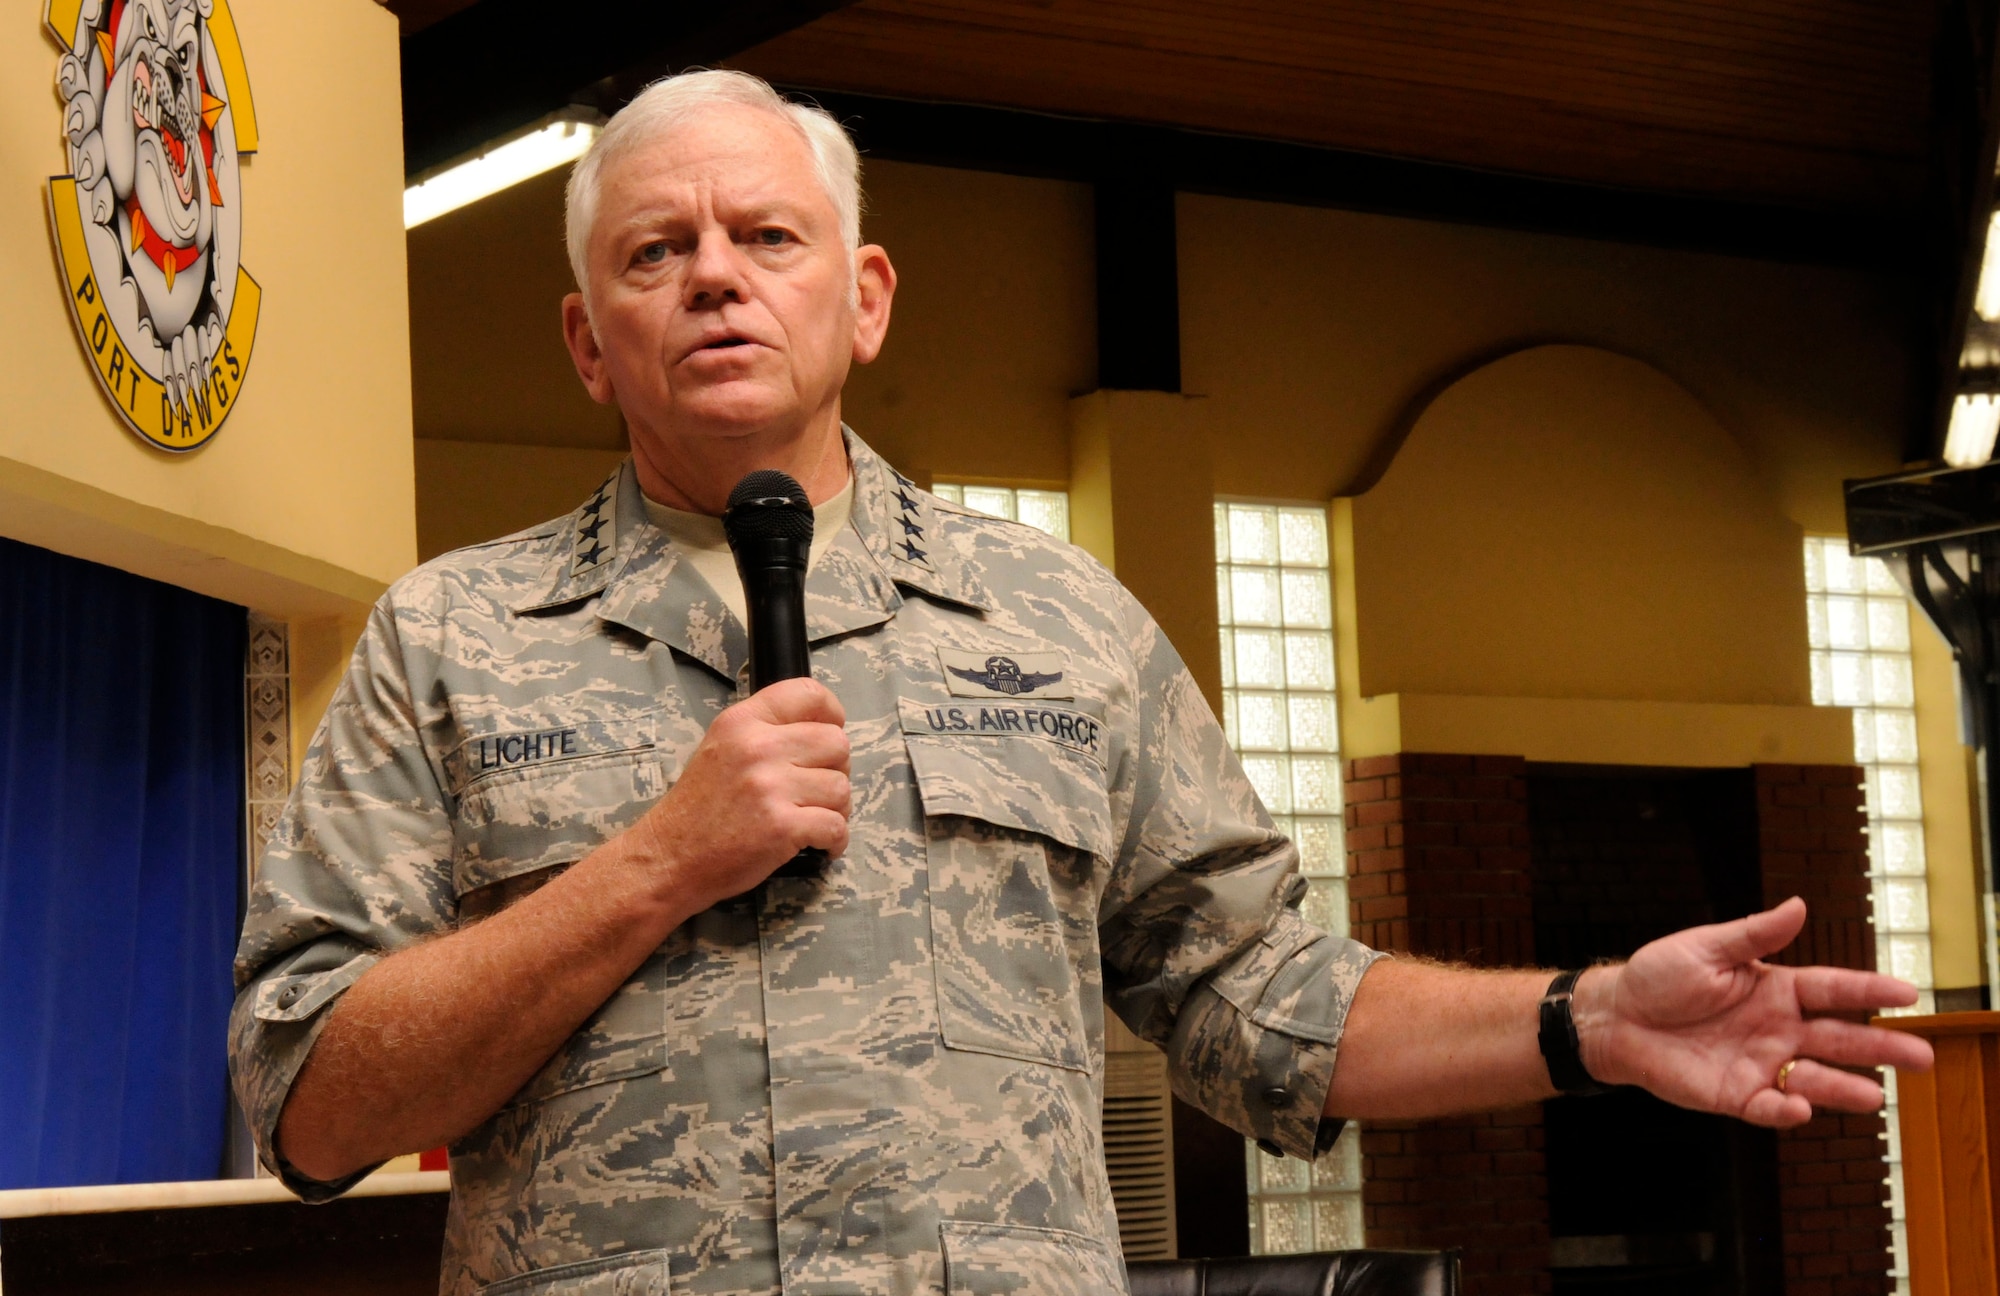 Gen. Arthur J. Lichte, Air Mobility Command commander, addresses Incirlik Airmen during a series of town hall meetings Monday, Oct. 5, 2009. General Lichte fielded questions ranging from Incirlik’s role in war and humanitarian efforts to the KC-X program. (U.S. Air Force photo/ Airman 1st Class Amber Ashcraft)